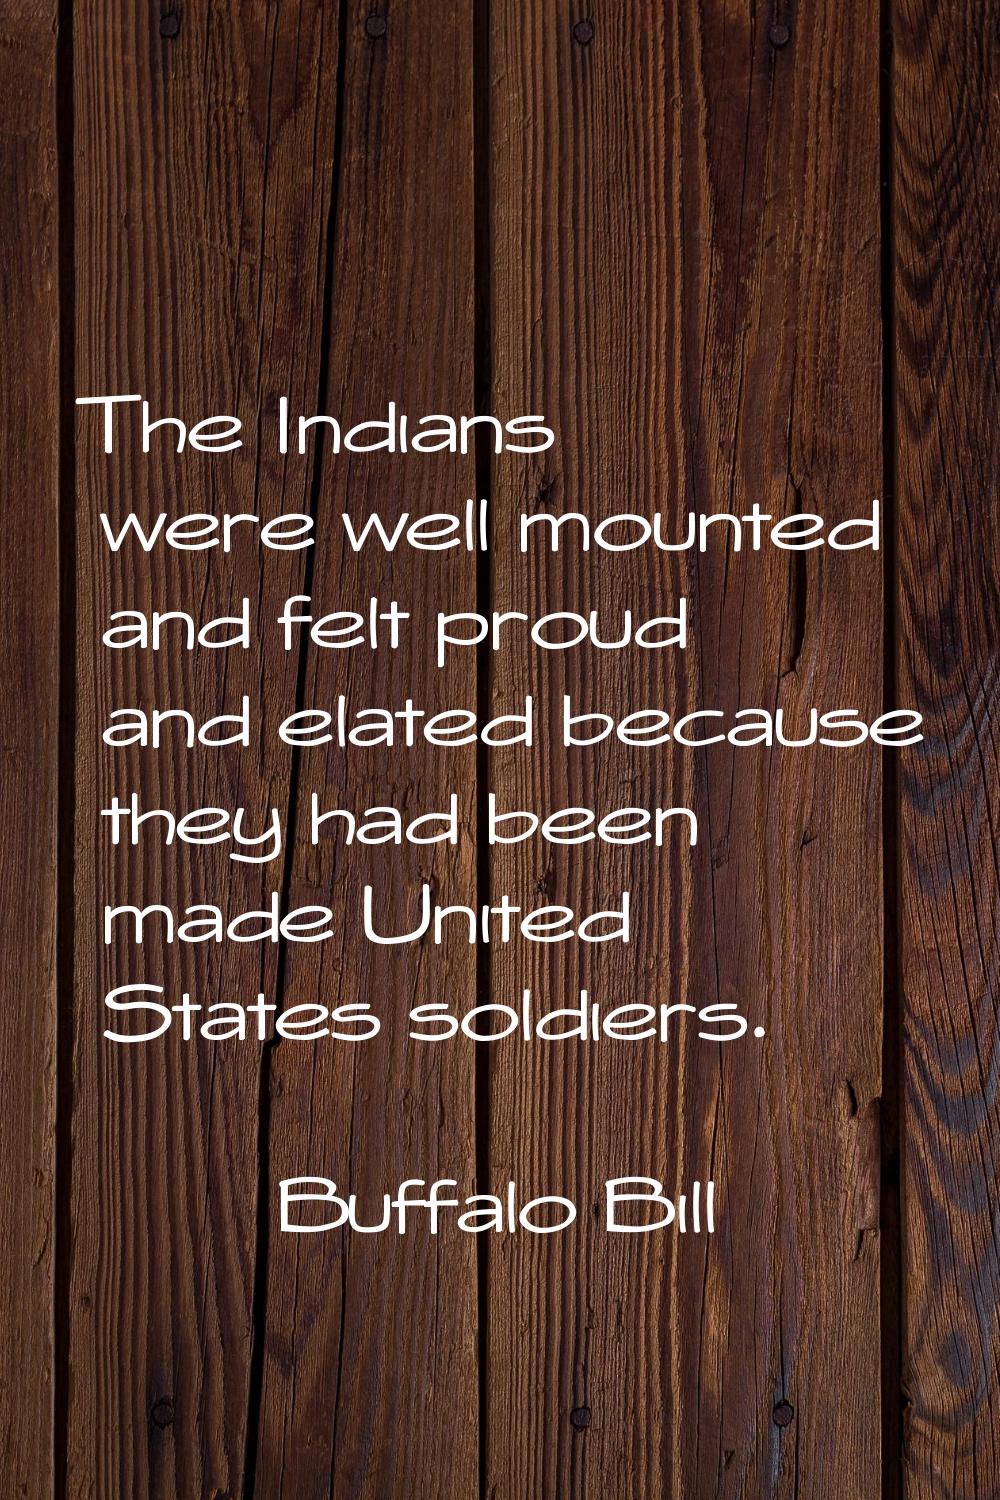 The Indians were well mounted and felt proud and elated because they had been made United States so